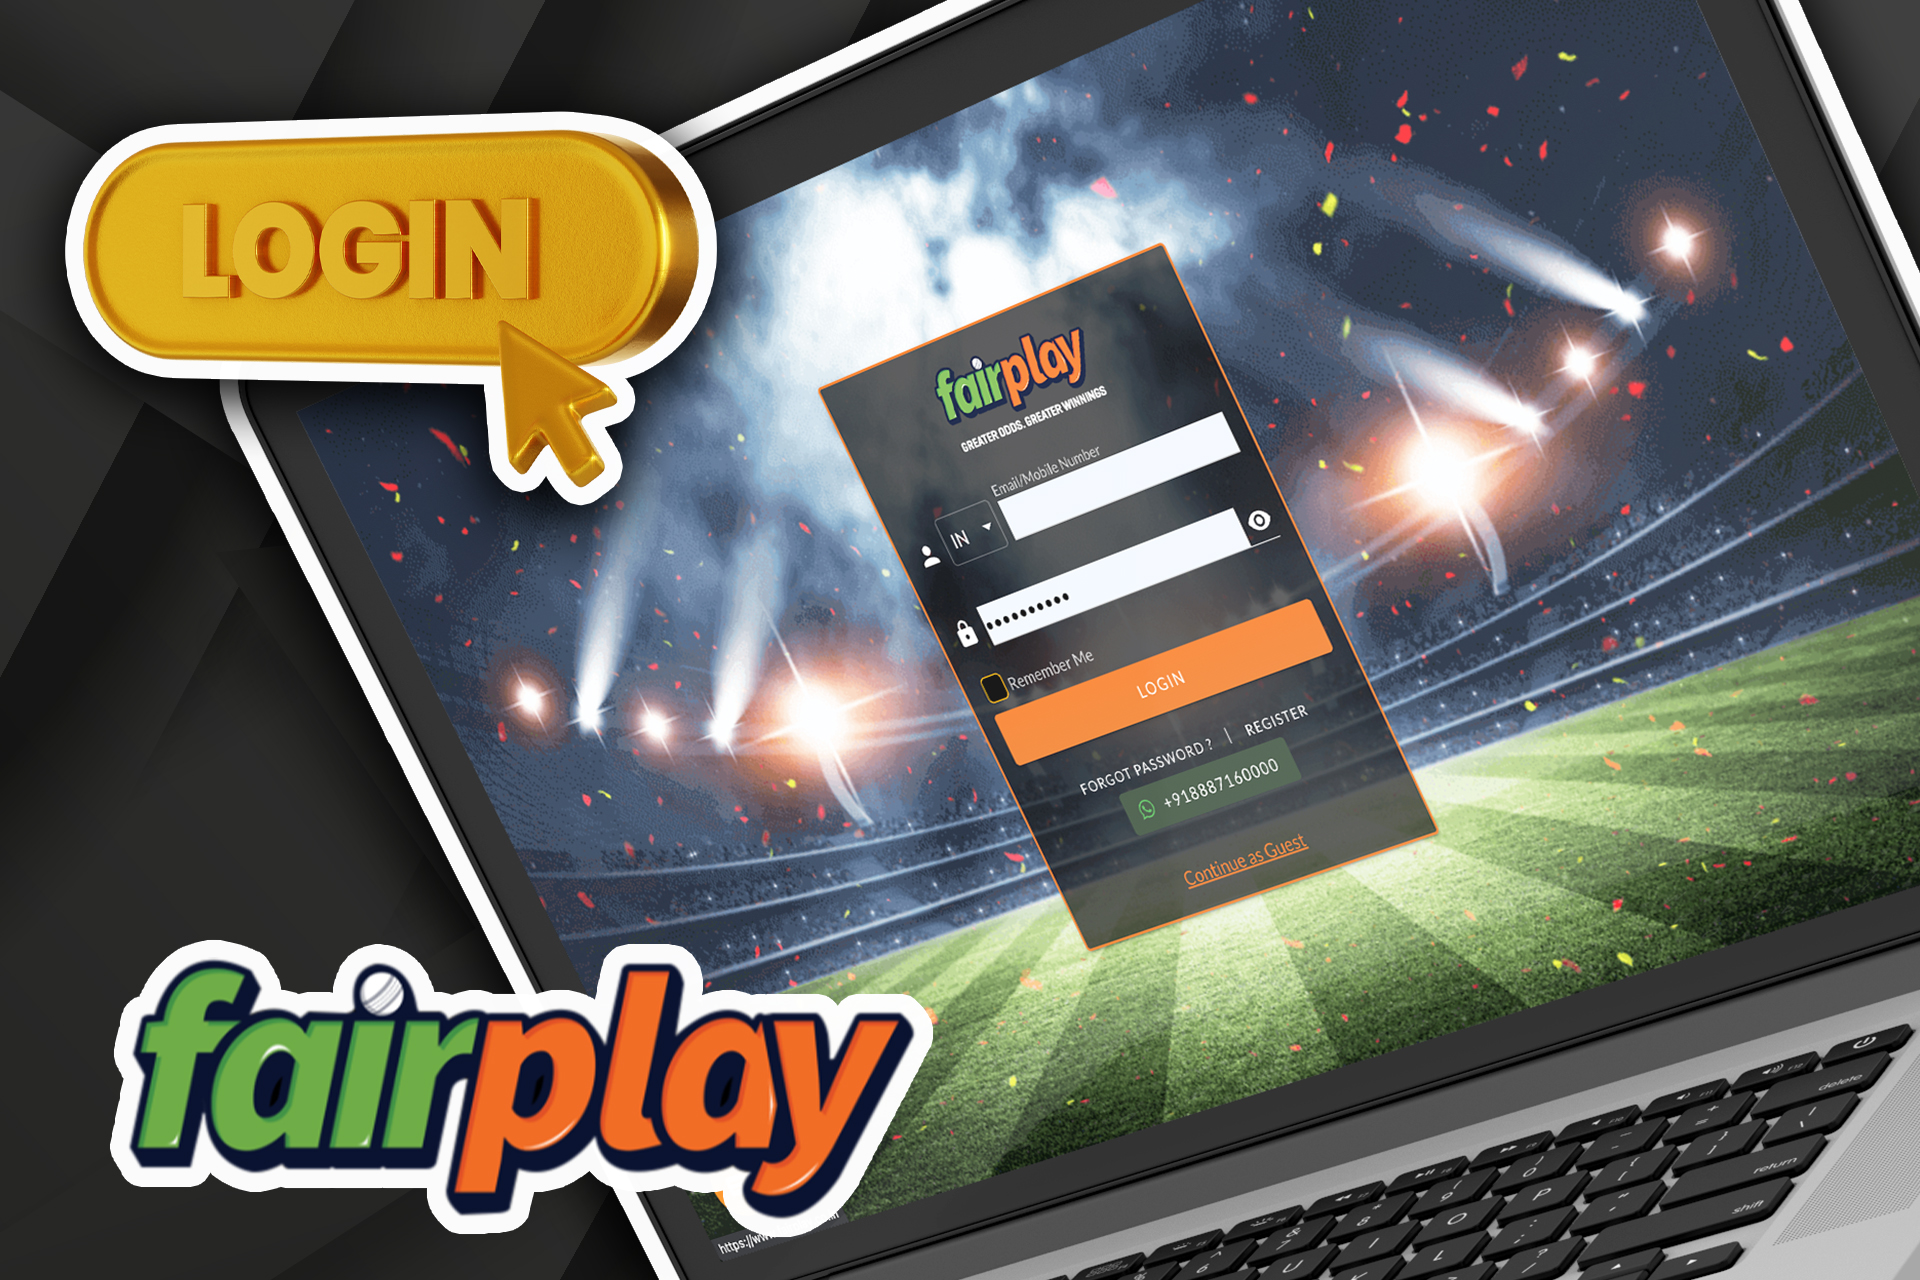 Enter your username and password to log in to Fairplay.